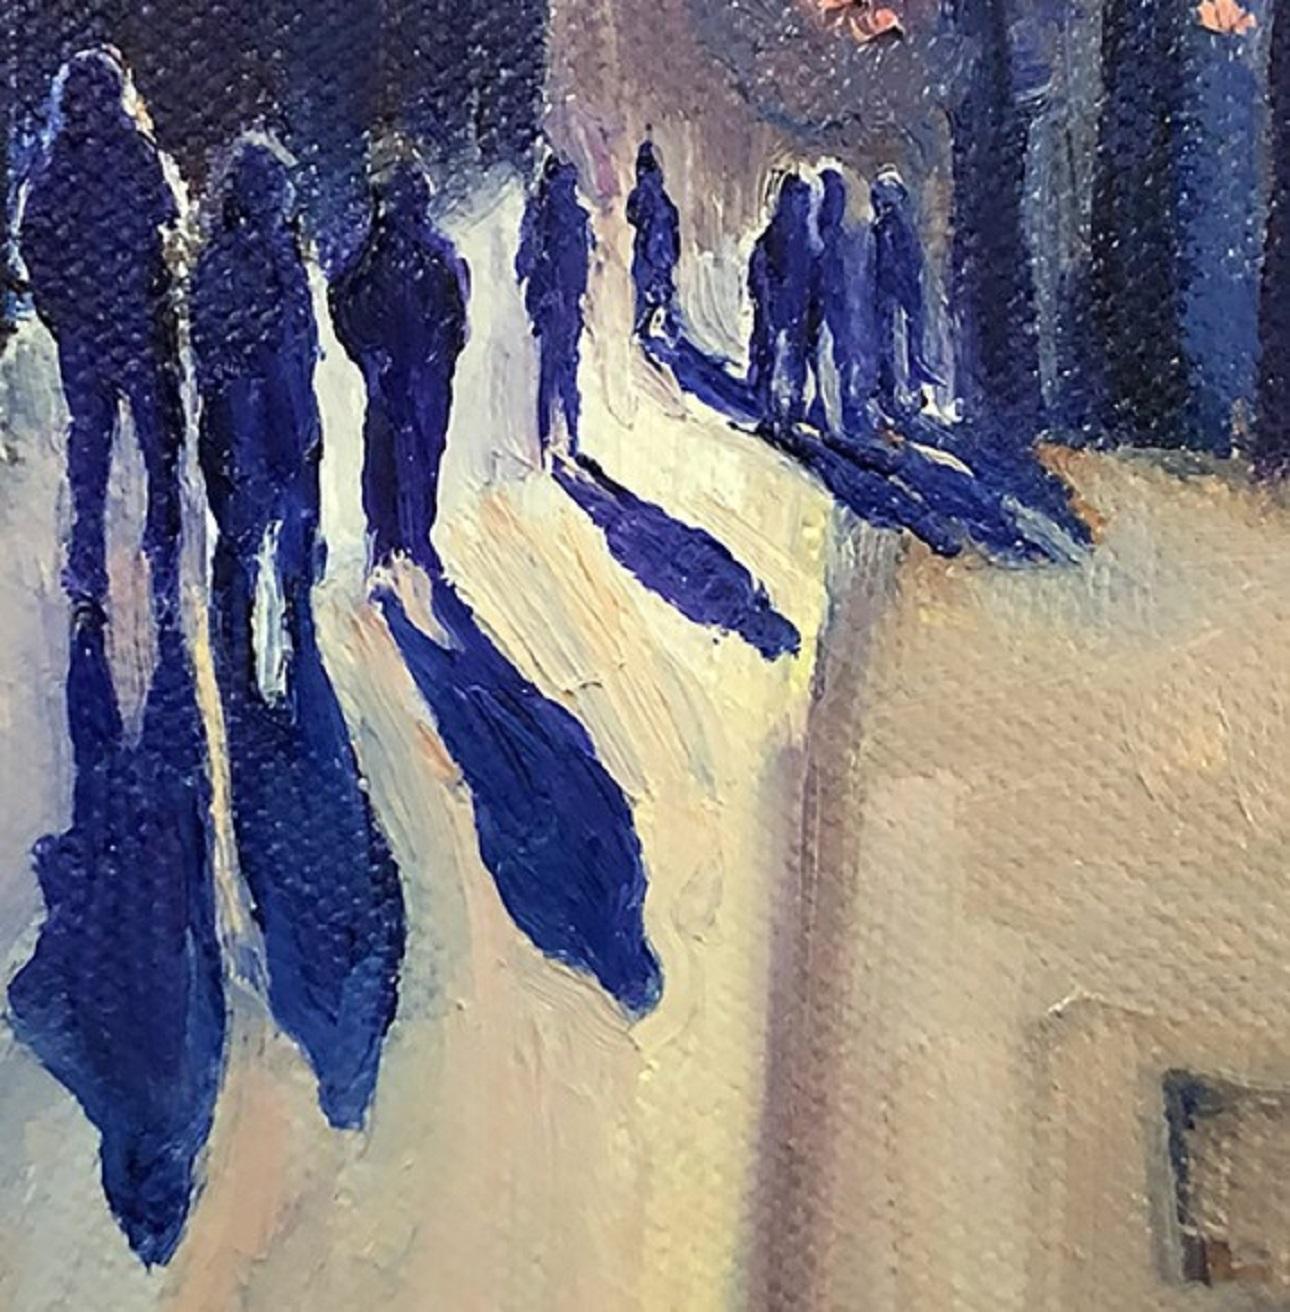 Winter Shadows 39, Original landscape paintings of people, still-life painting - Painting by Eleanor Woolley